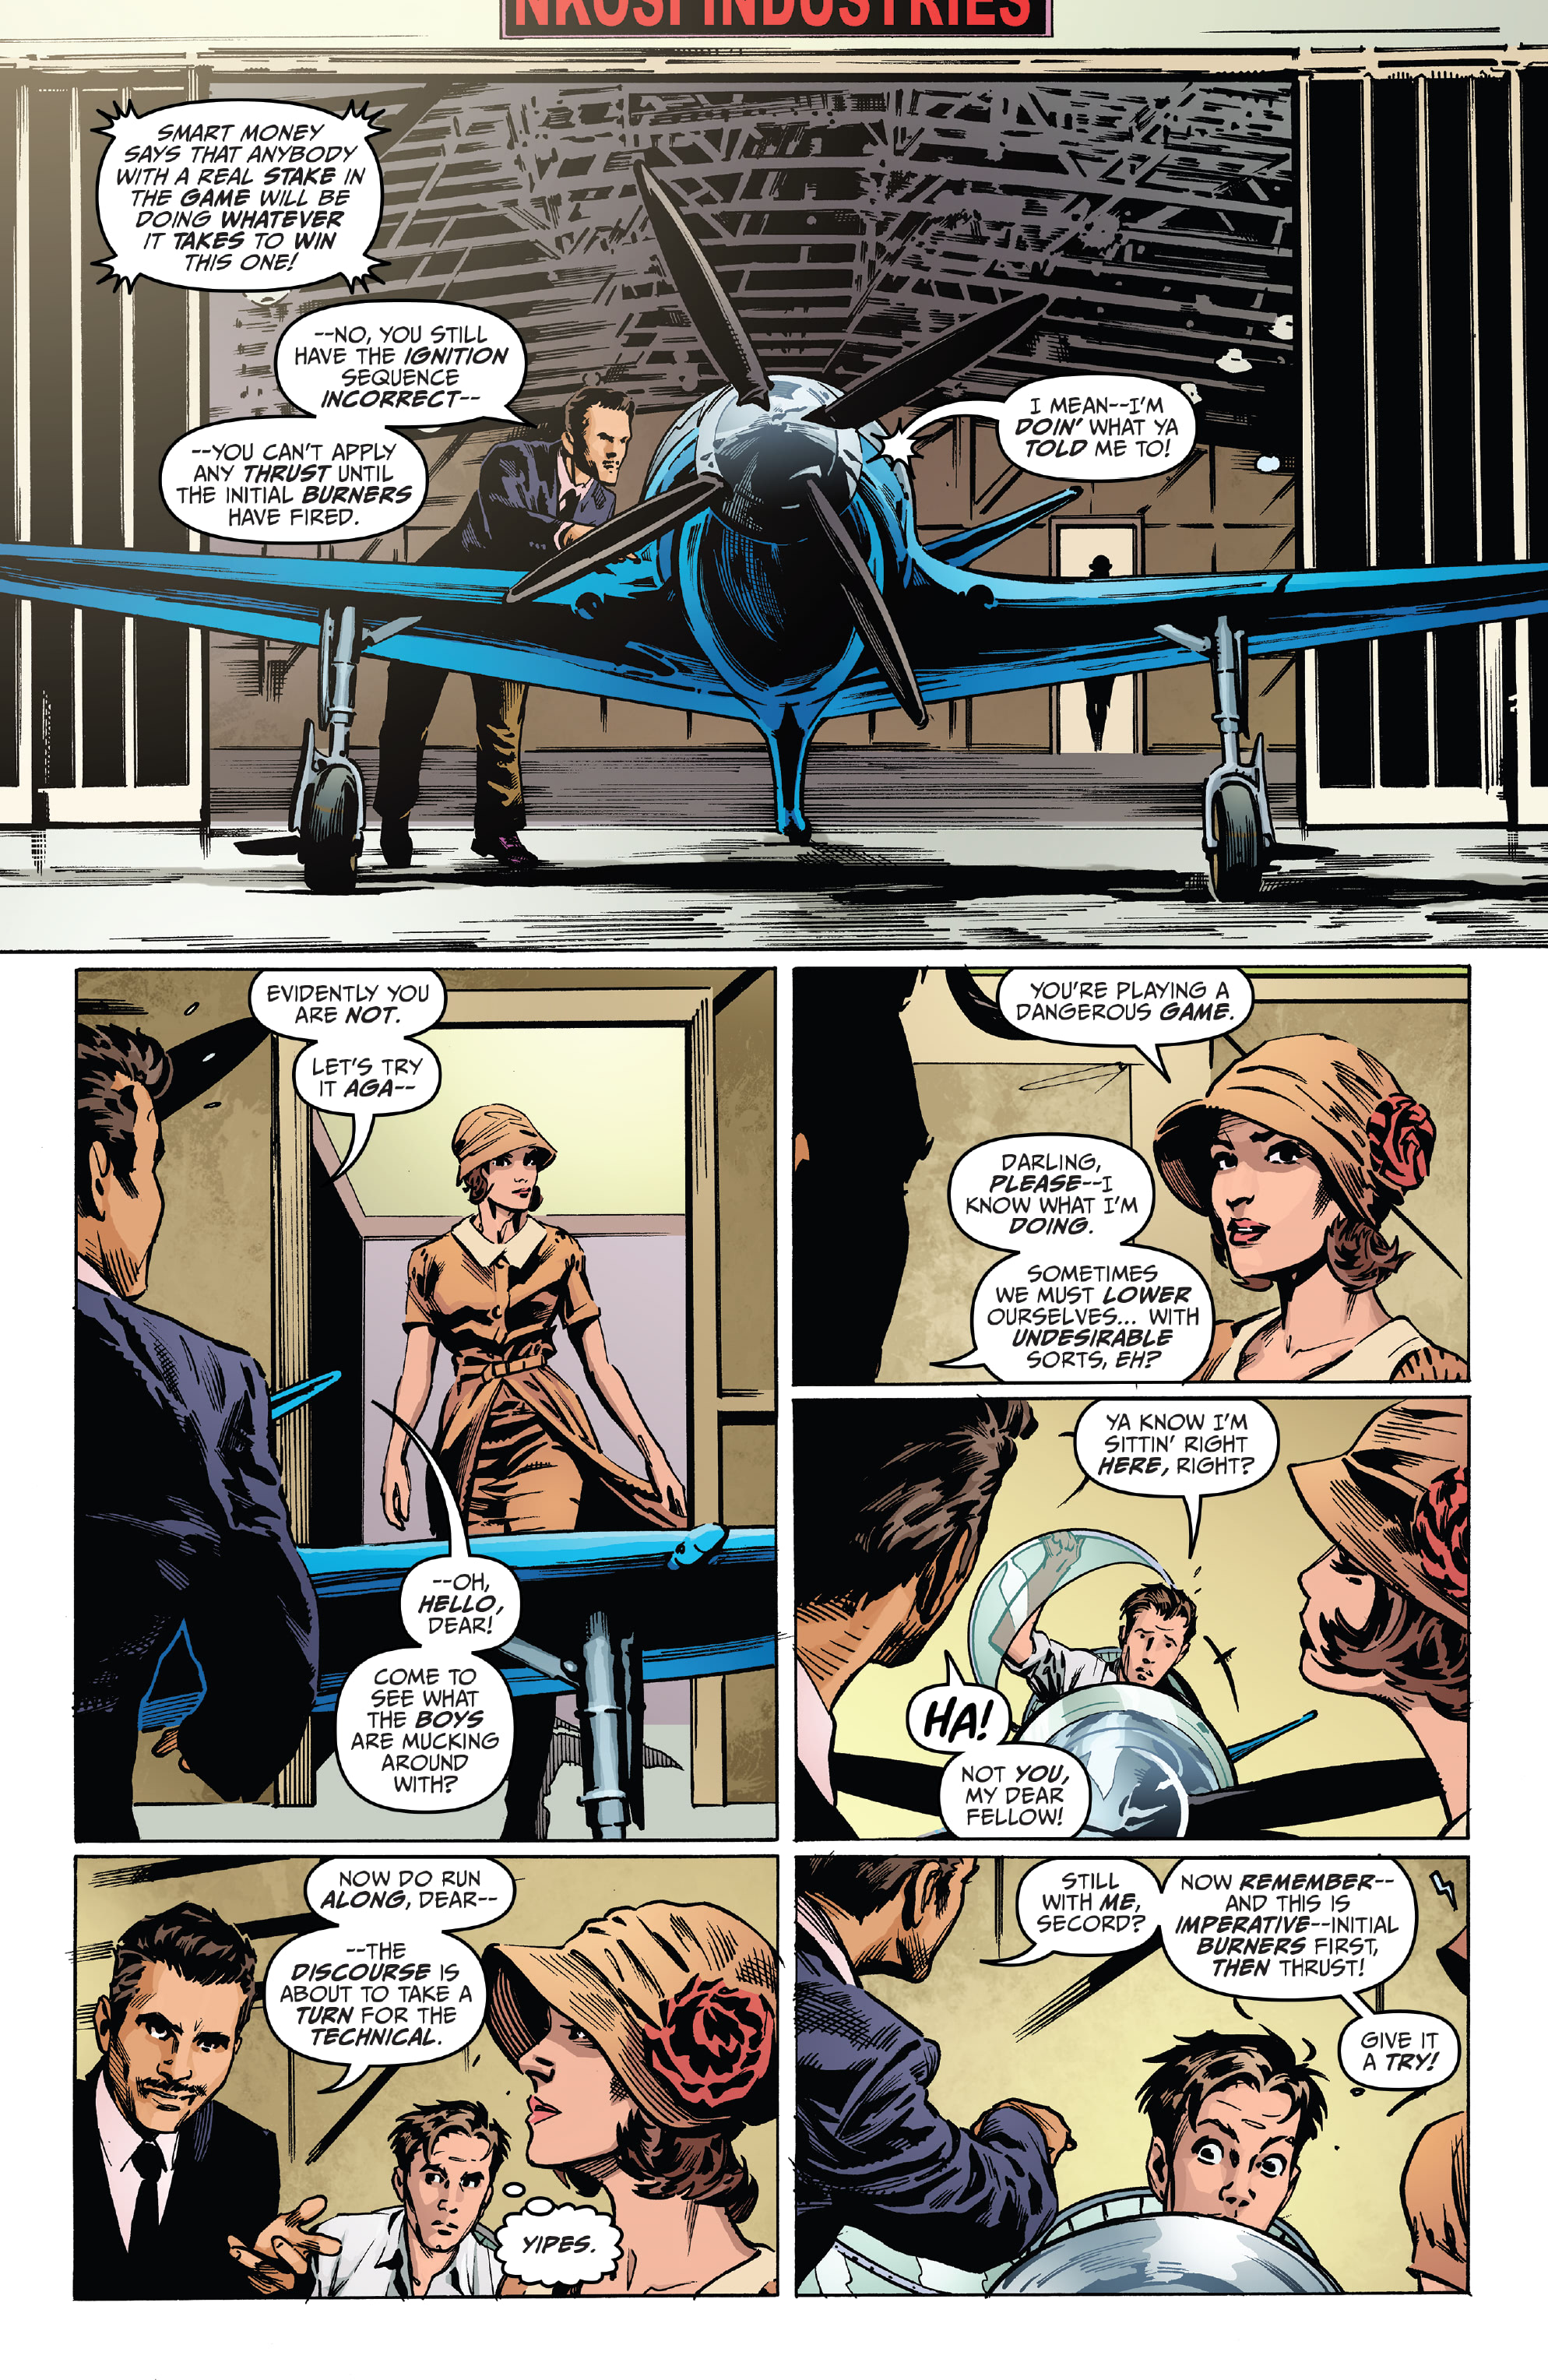 The Rocketeer: The Great Race (2022-): Chapter 2 - Page 4